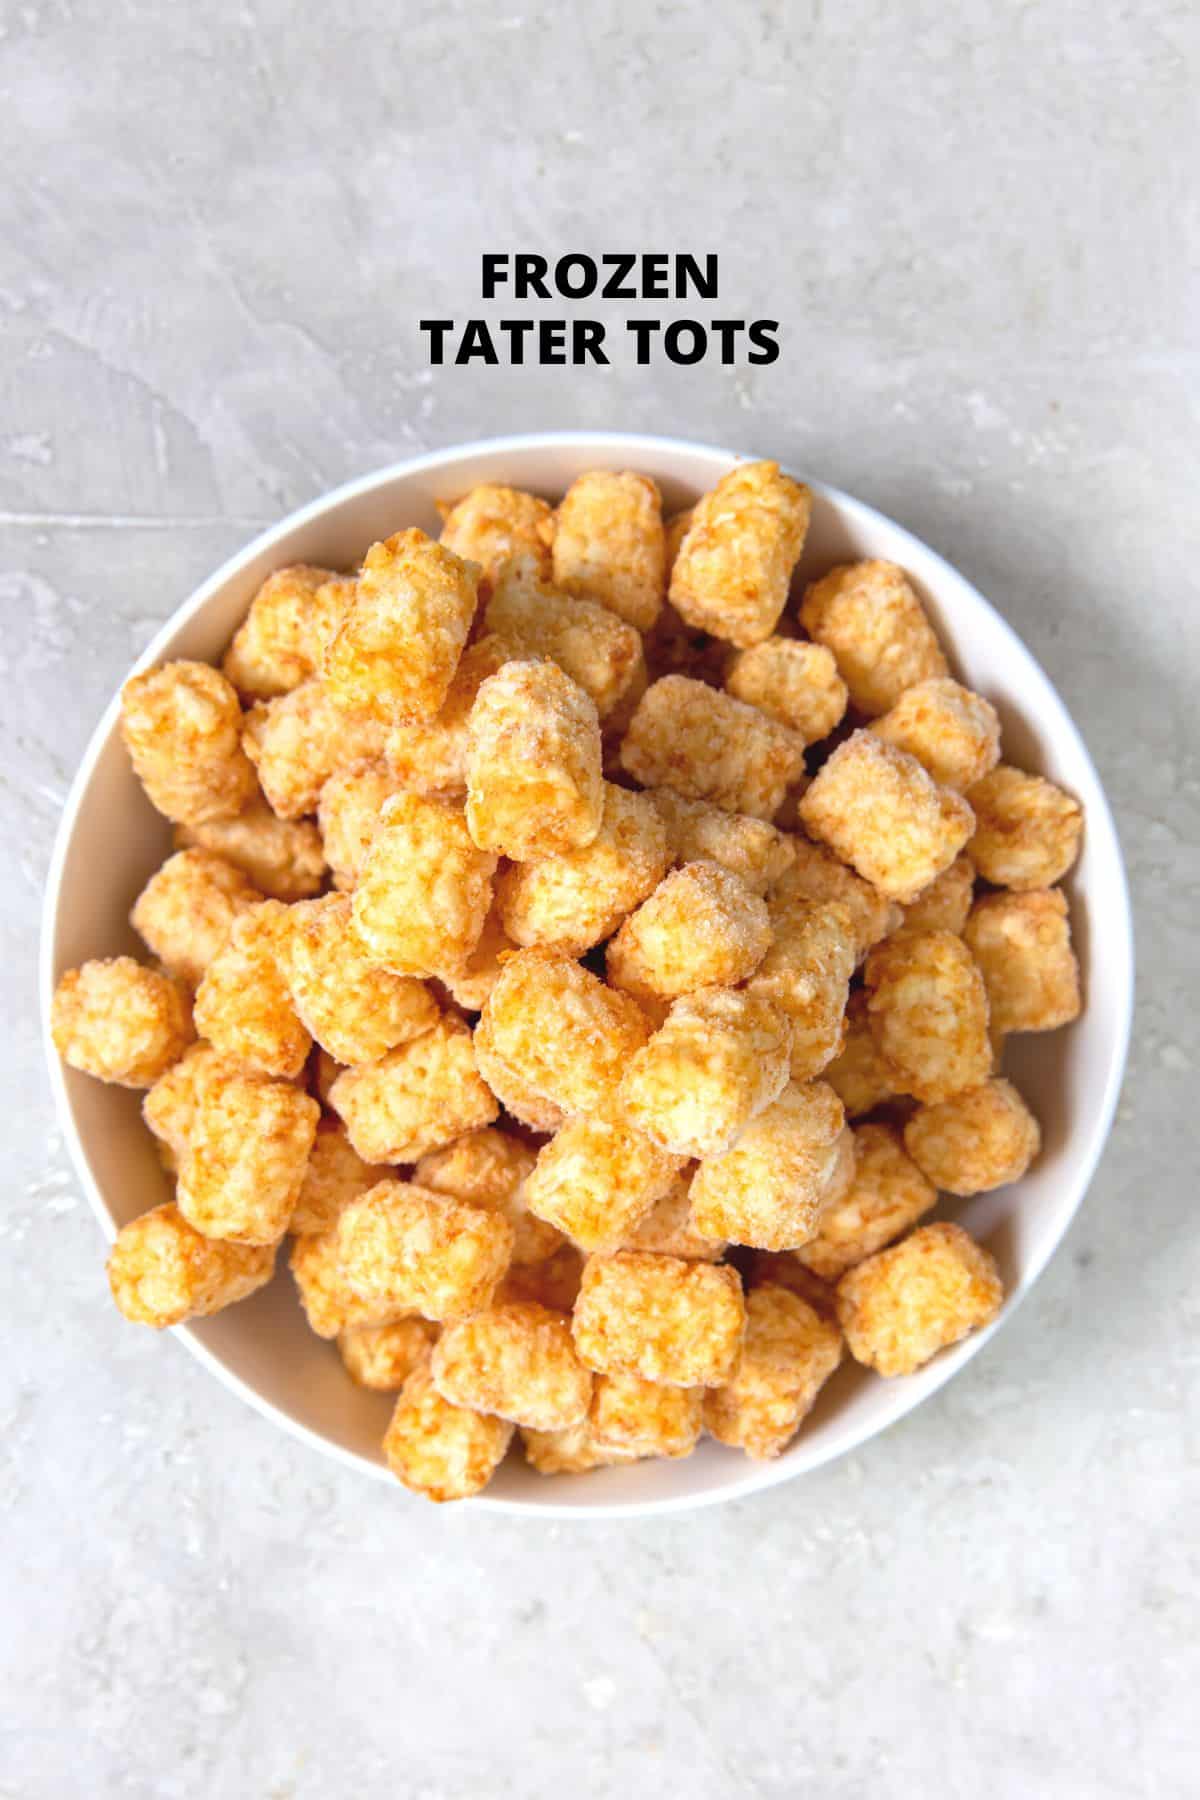 A bowl of frozen tater tots on a grey background.